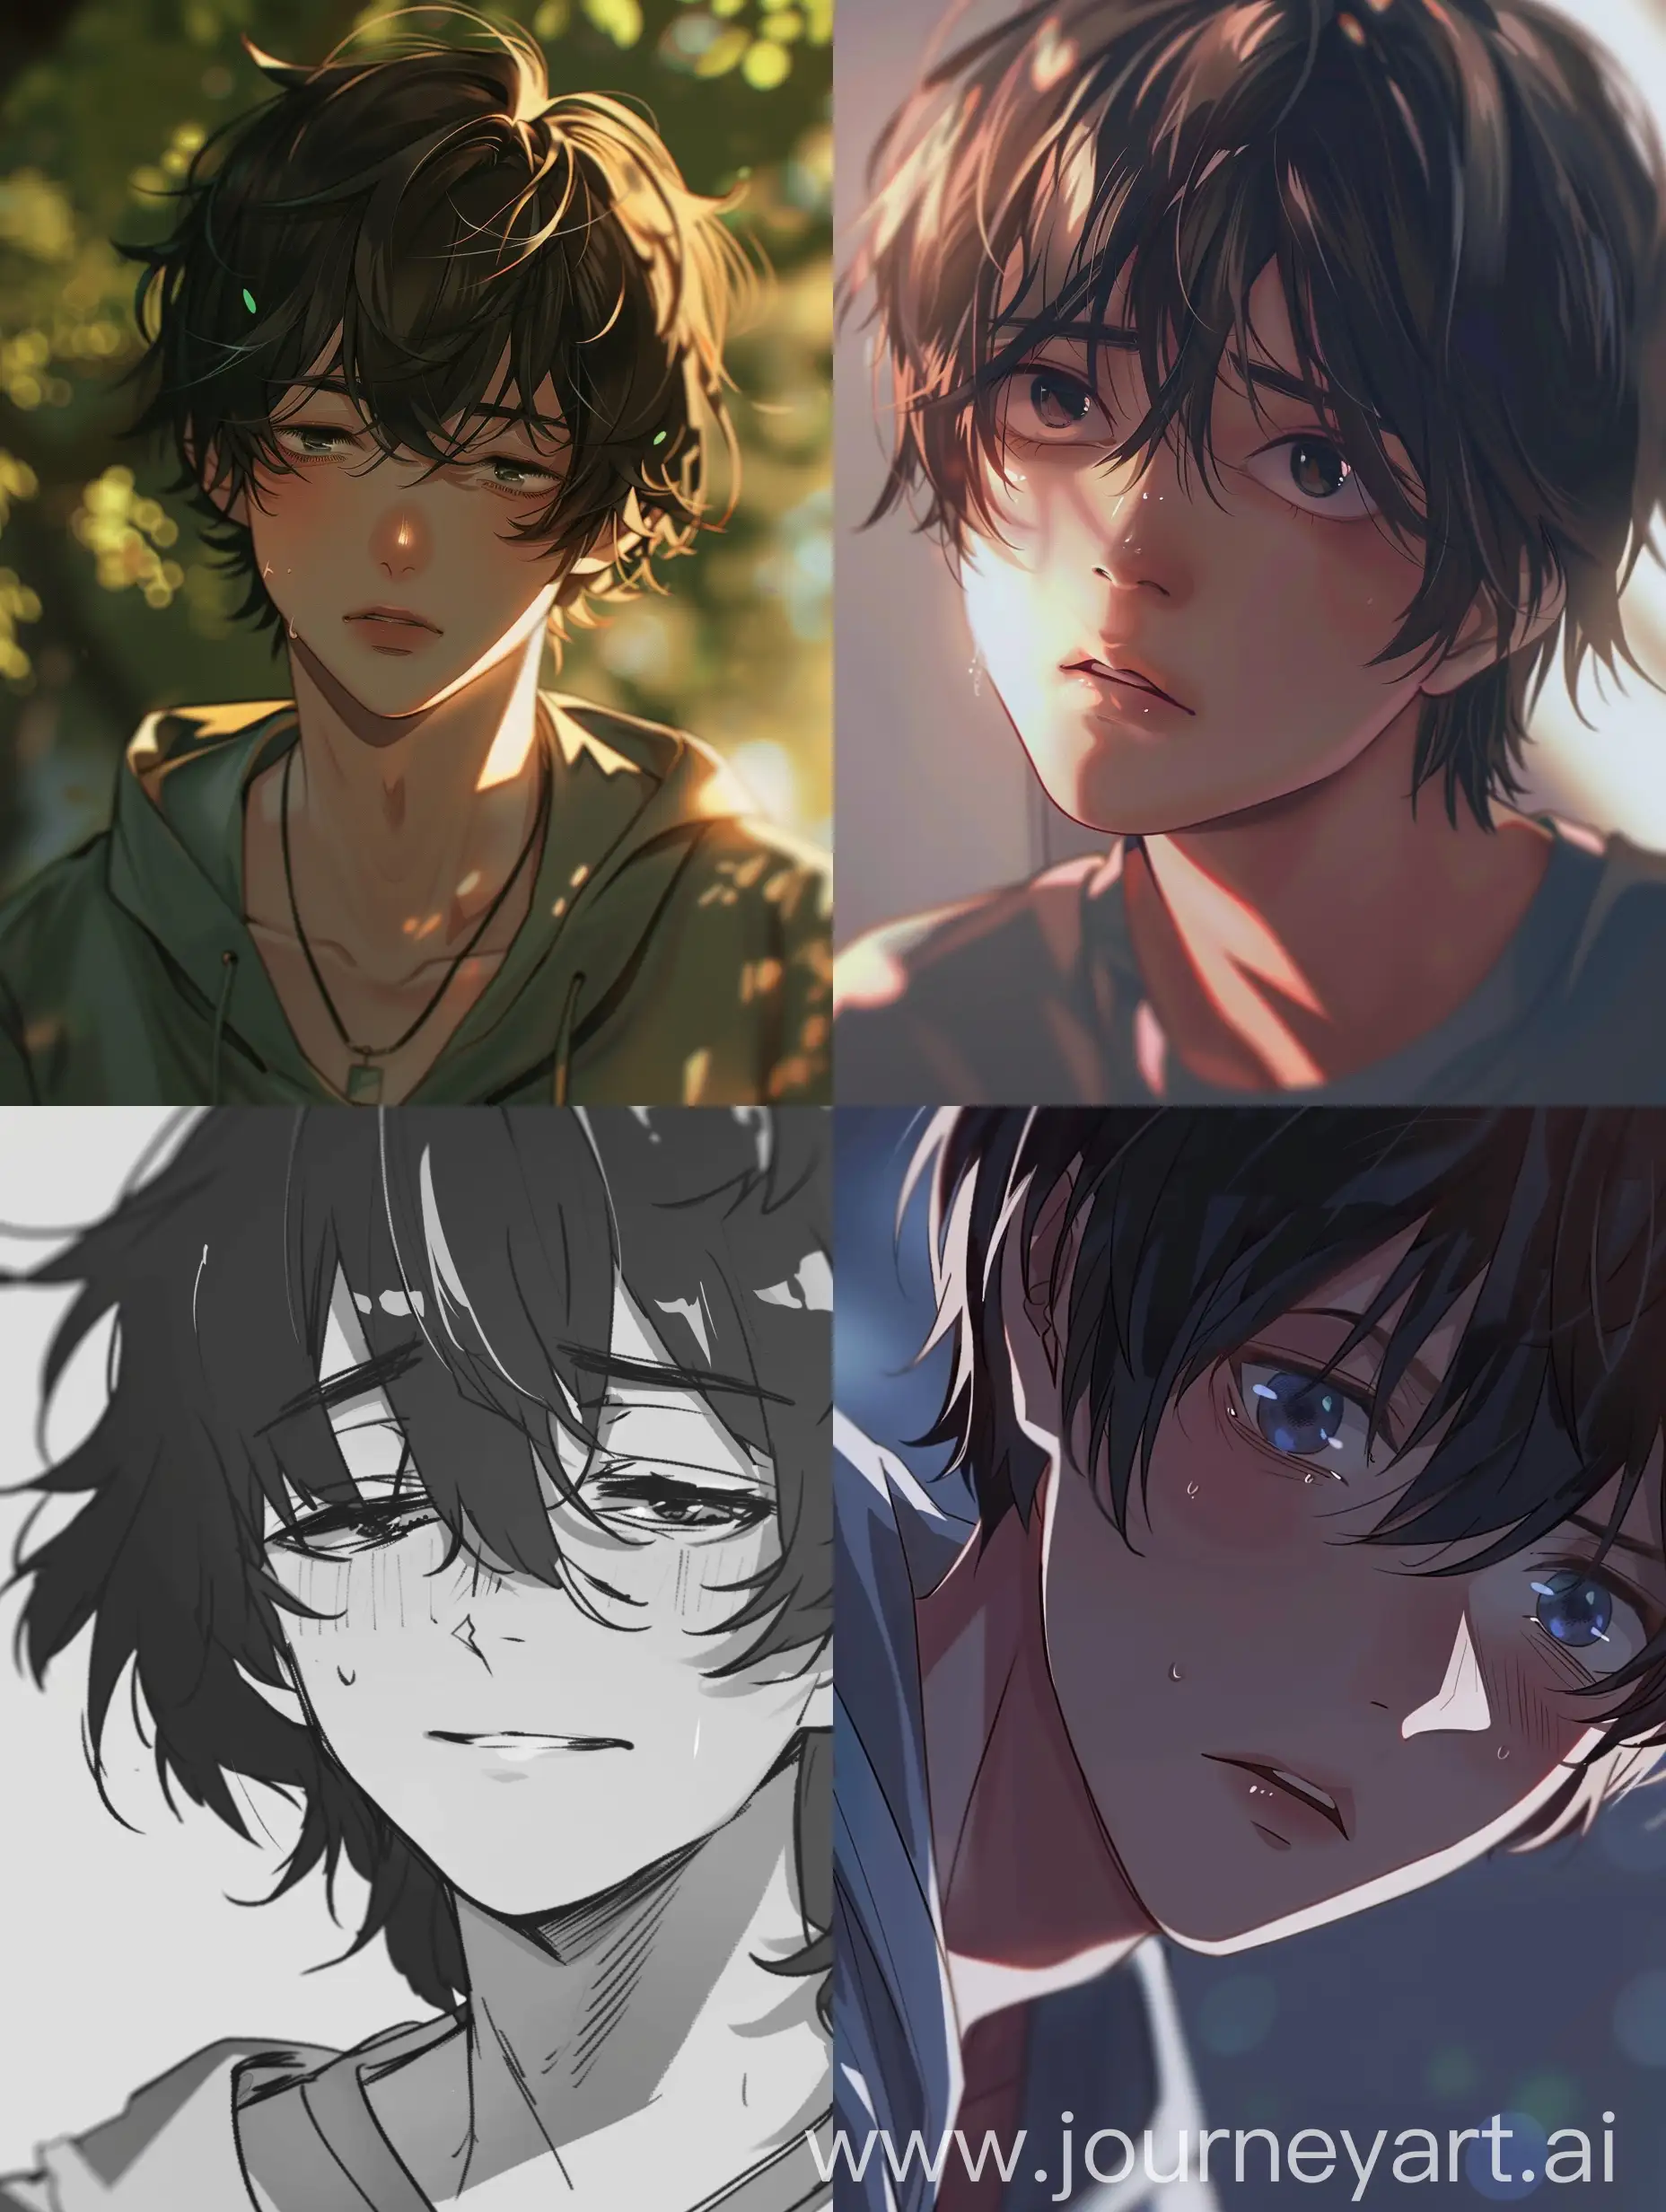 Anime style,character close up,a 15 year old boy chill but lost in thinking,no reaction but a simple smile,dramatic.